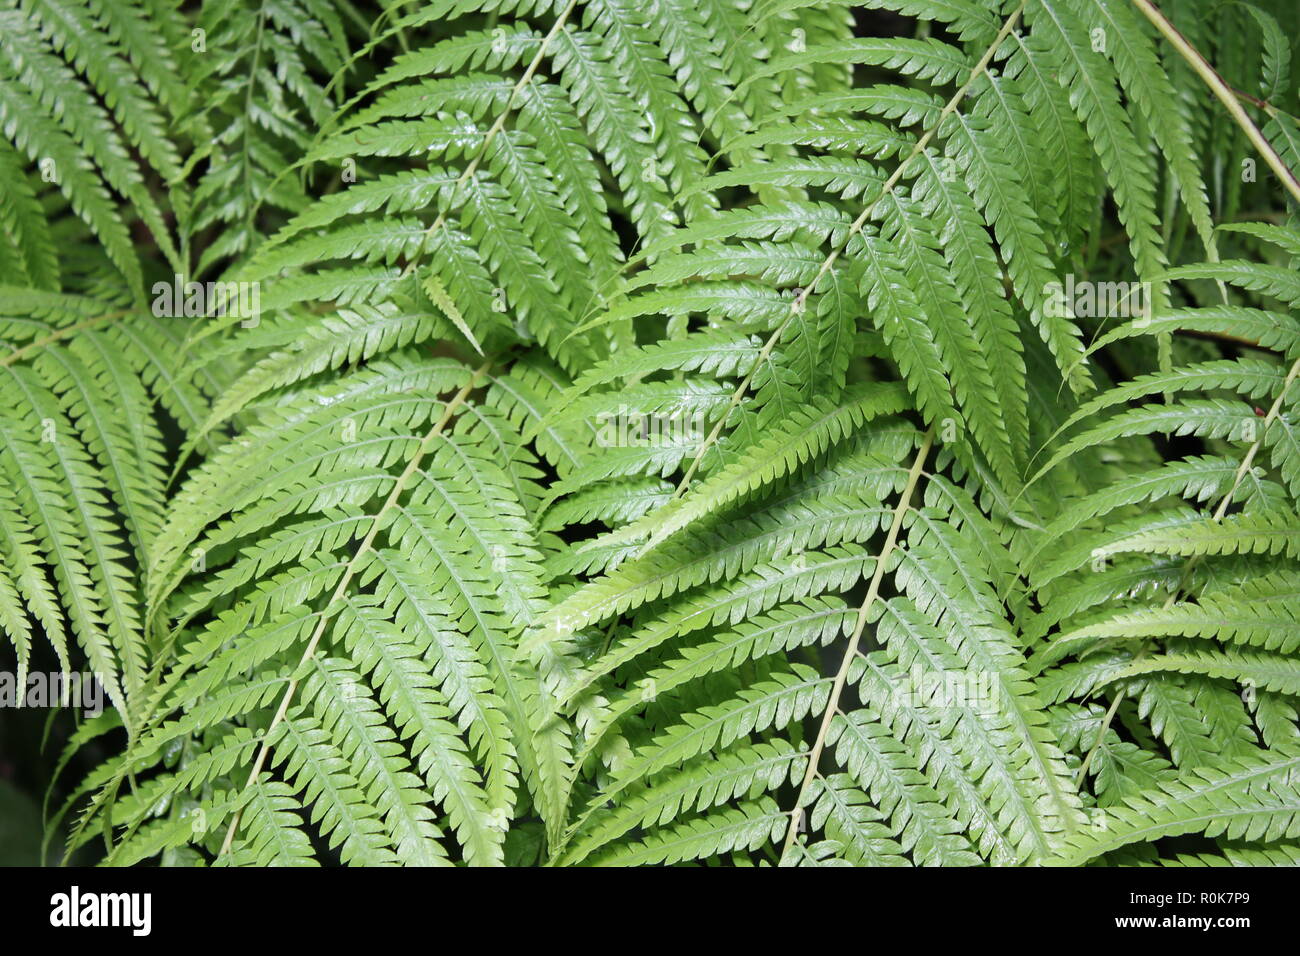 Dicksonia sellowiana, Cibotium schiedei, Mexican Tree Fern, flawless, beautiful, stunning cultivated fronds and plants. Stock Photo